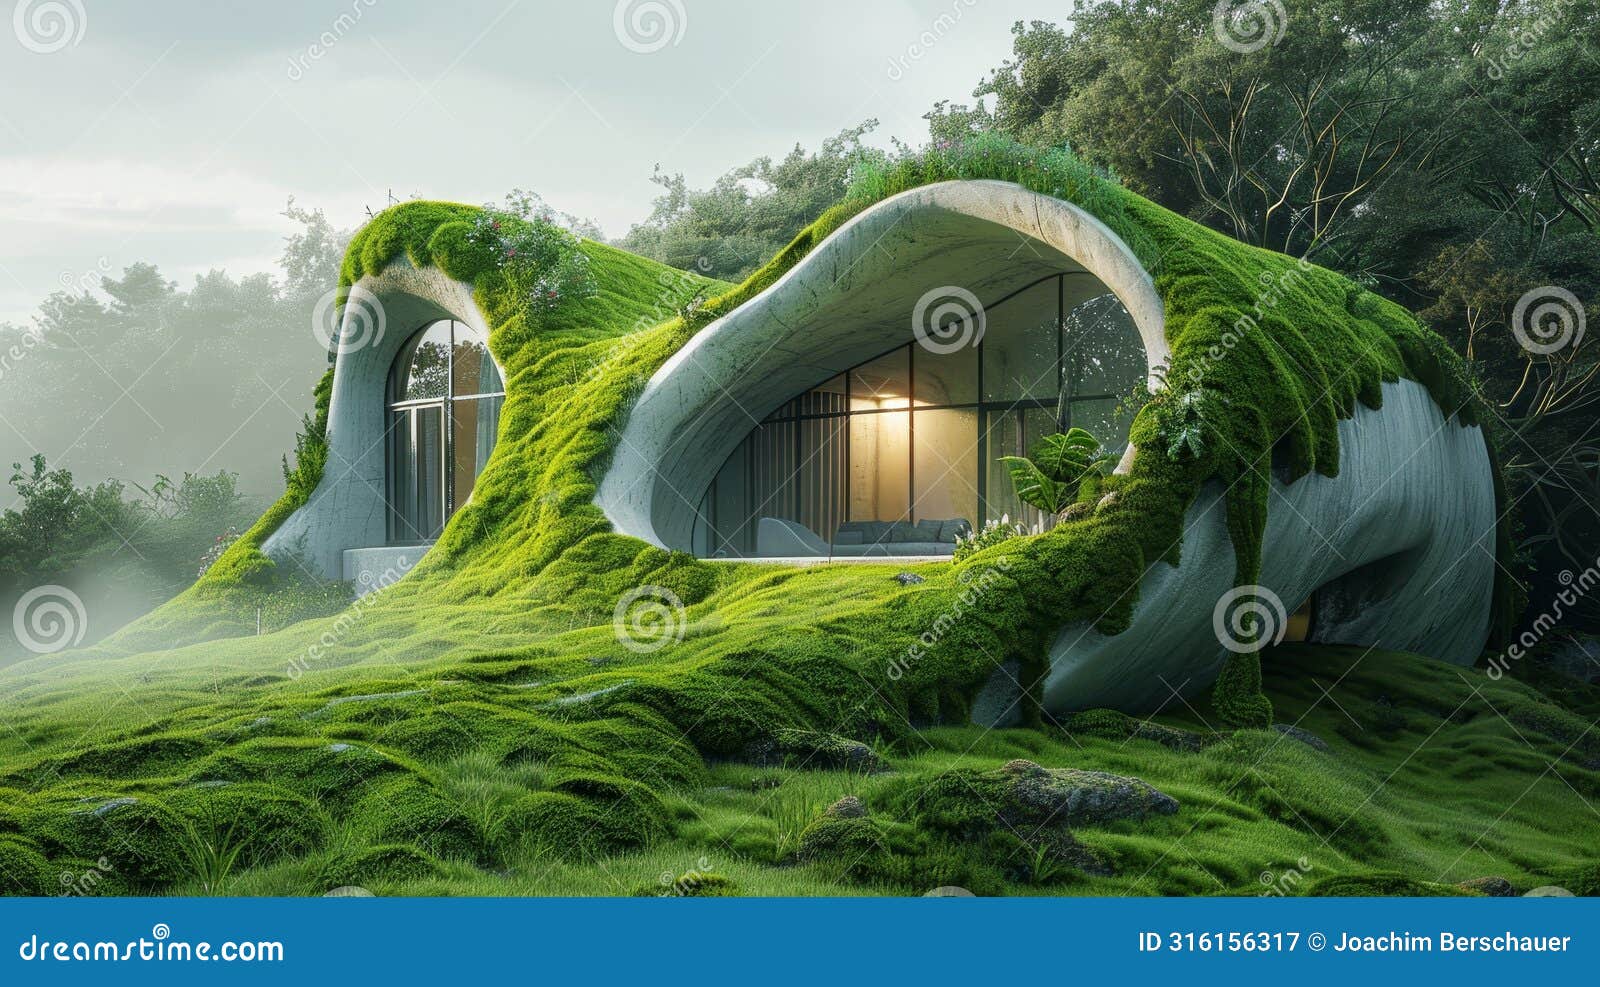 surreal fusion nature and architecture converge in unique meadow house rendering